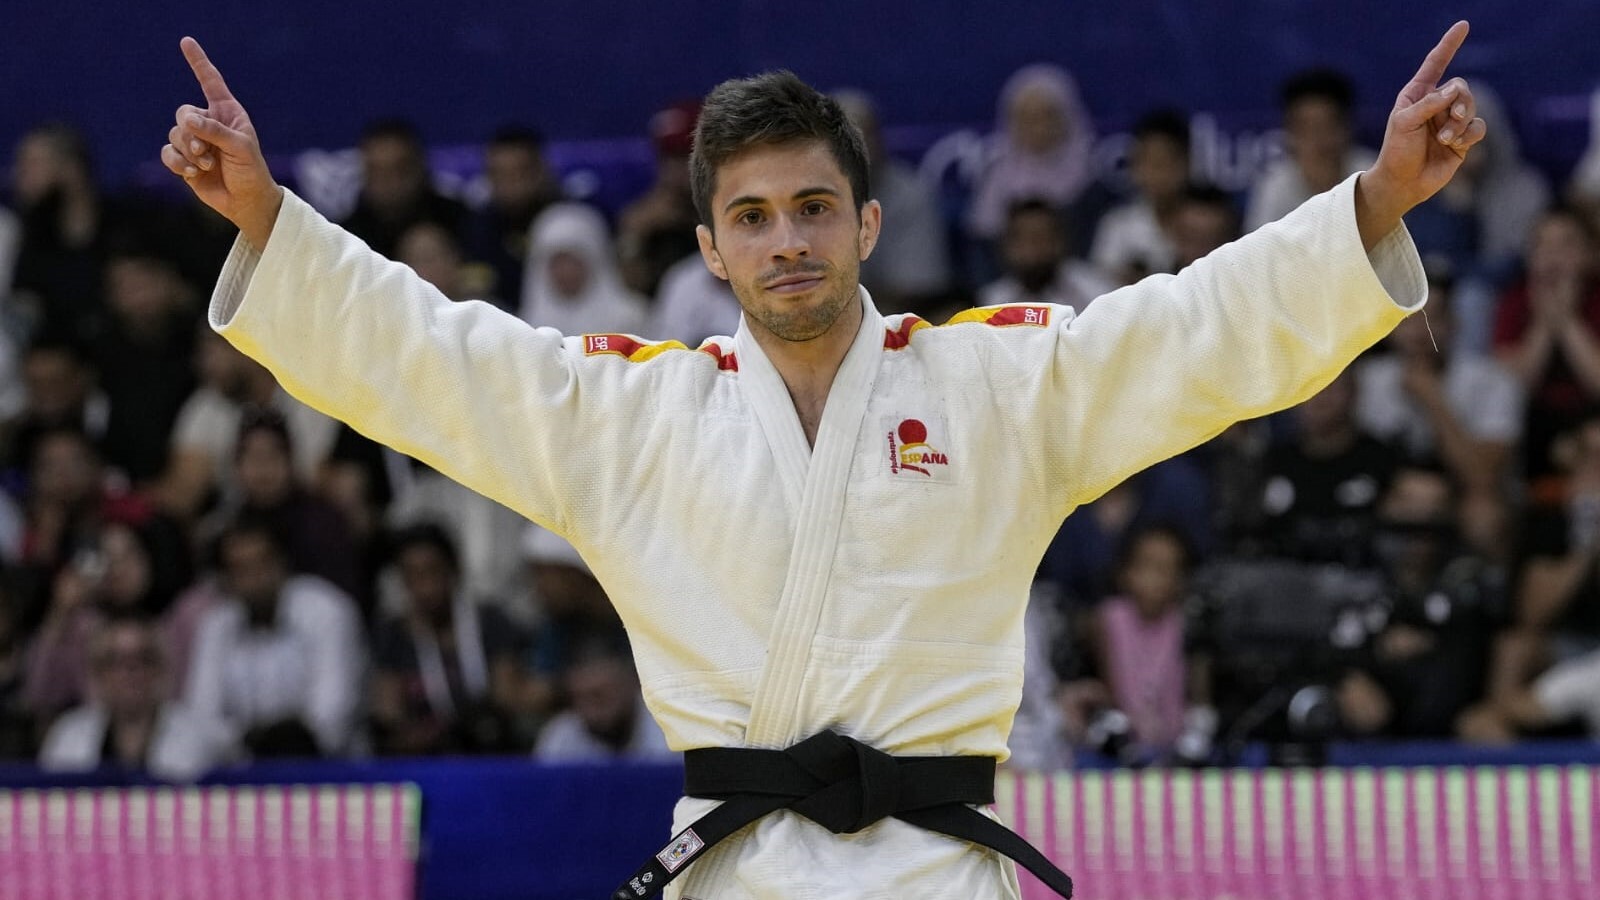 the first gold for Spain in judo